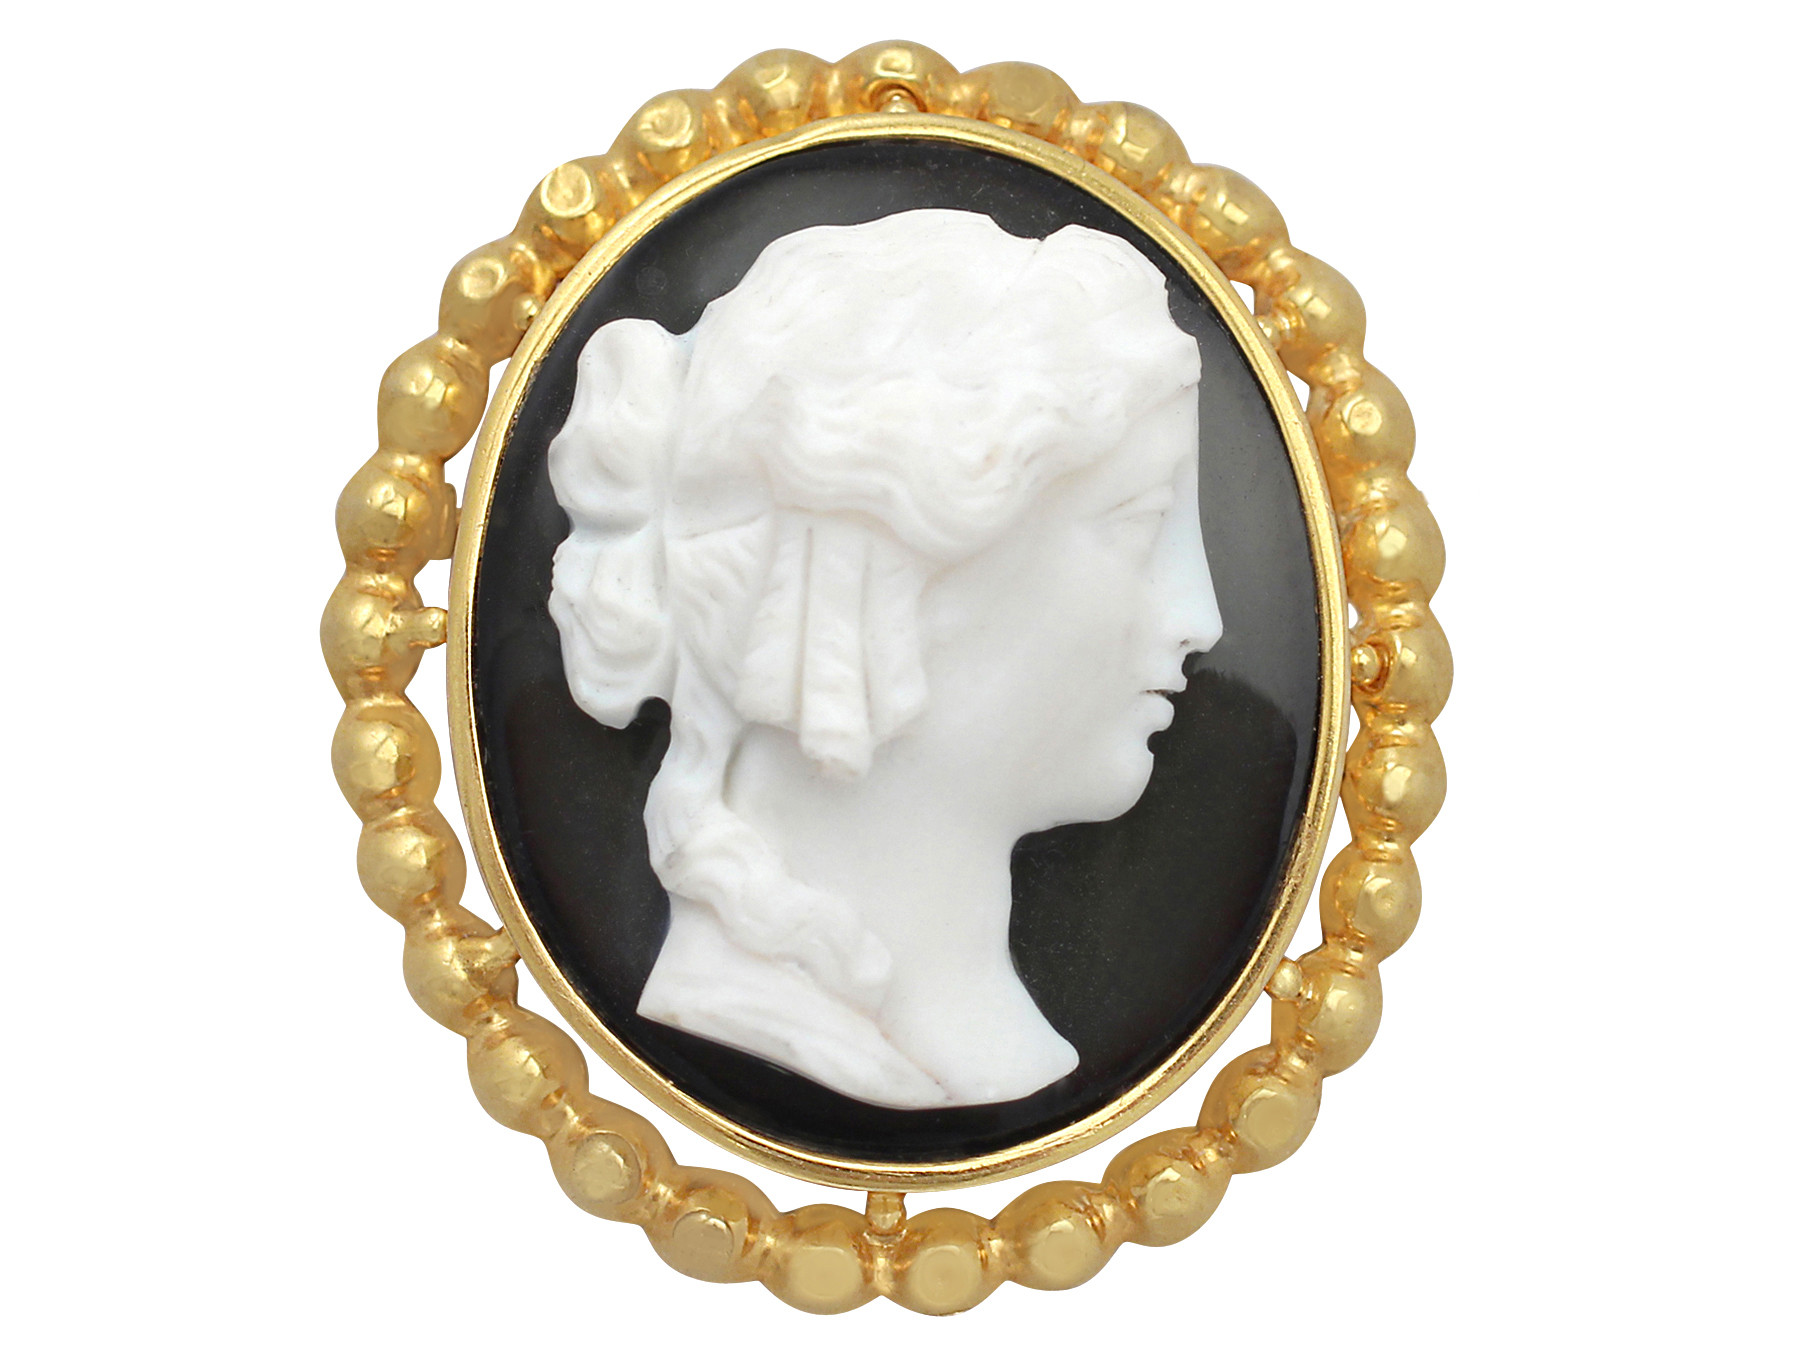 antique french cameo brooch / pendant in 18 ct yellow gold aeojfag